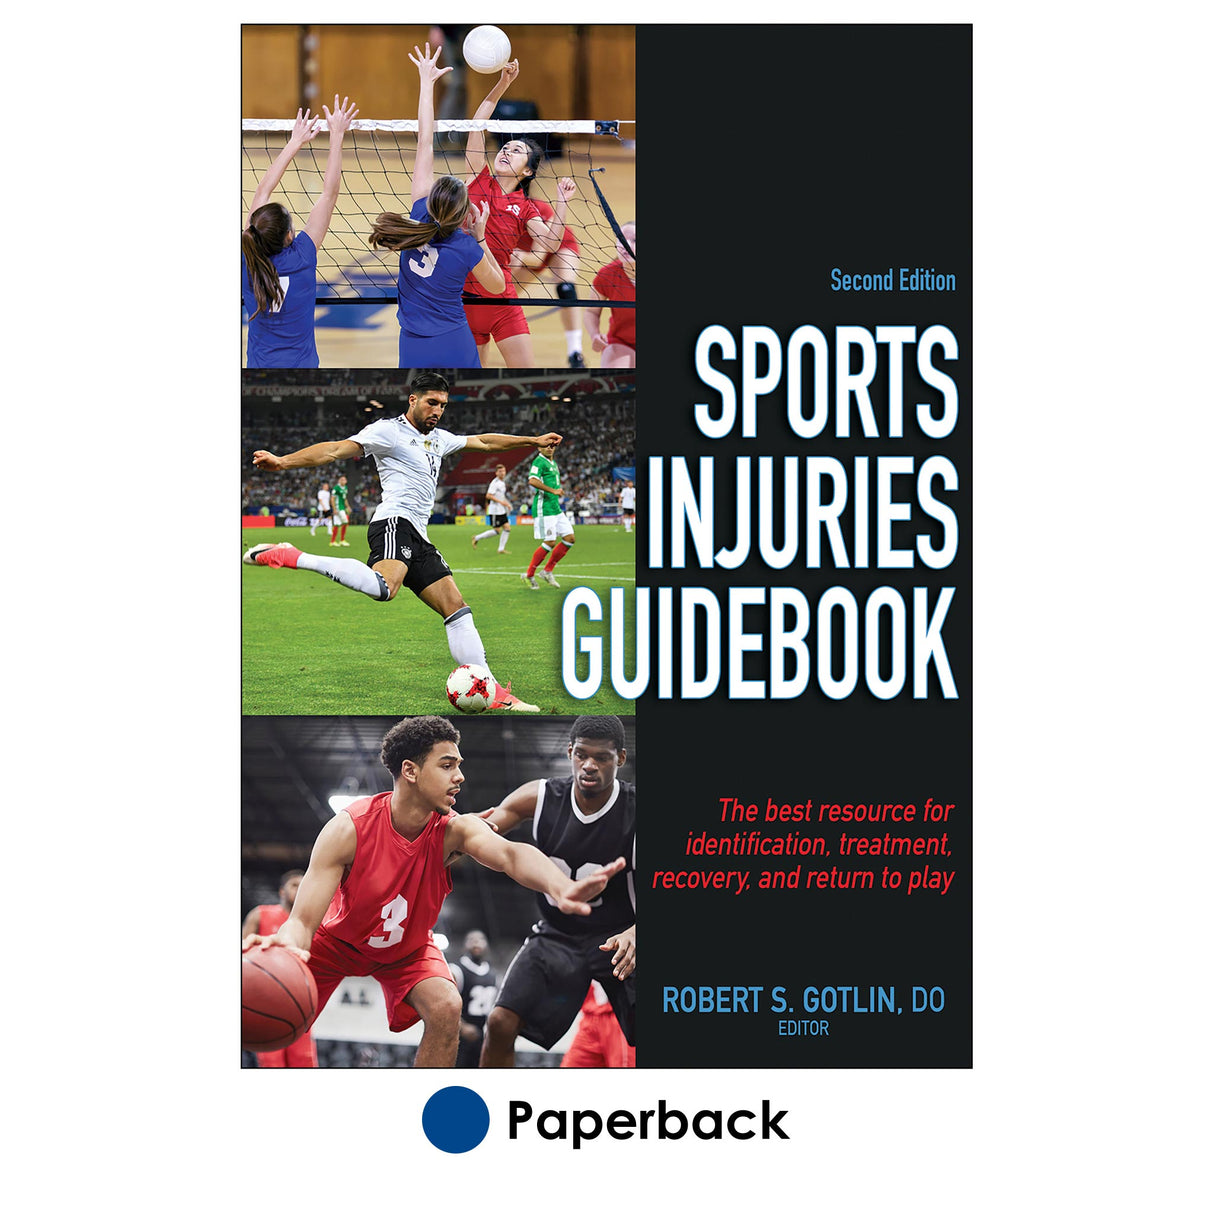 Sports Injuries Guidebook-2nd Edition